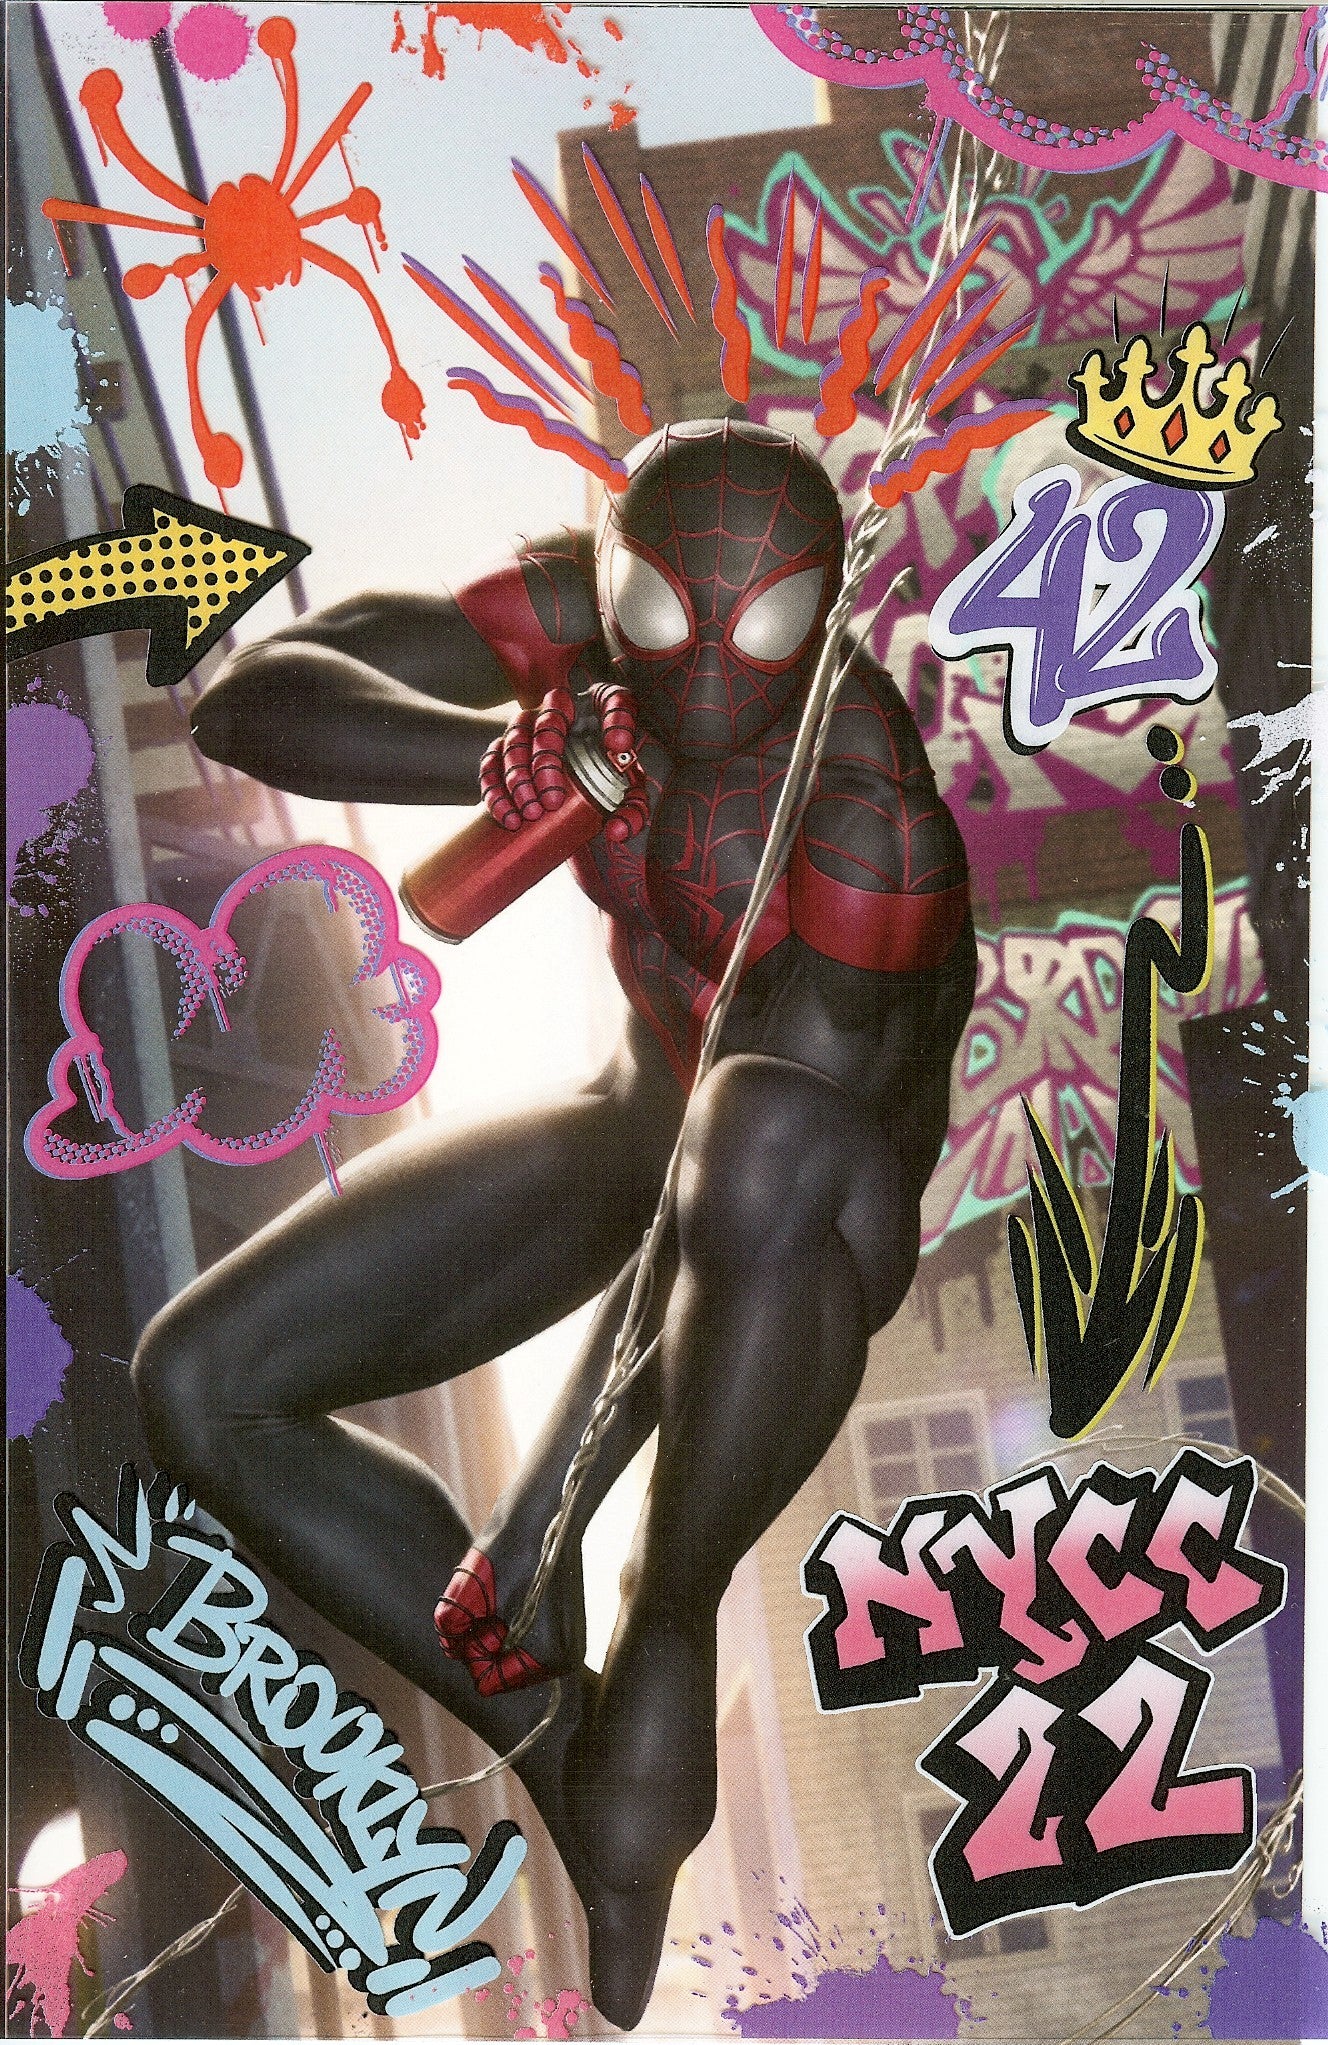 MILES MORALES: SPIDER-MAN #42 - NYCC 2022 EXCLUSIVE Variant by YOON –  Collectors Choice Comics